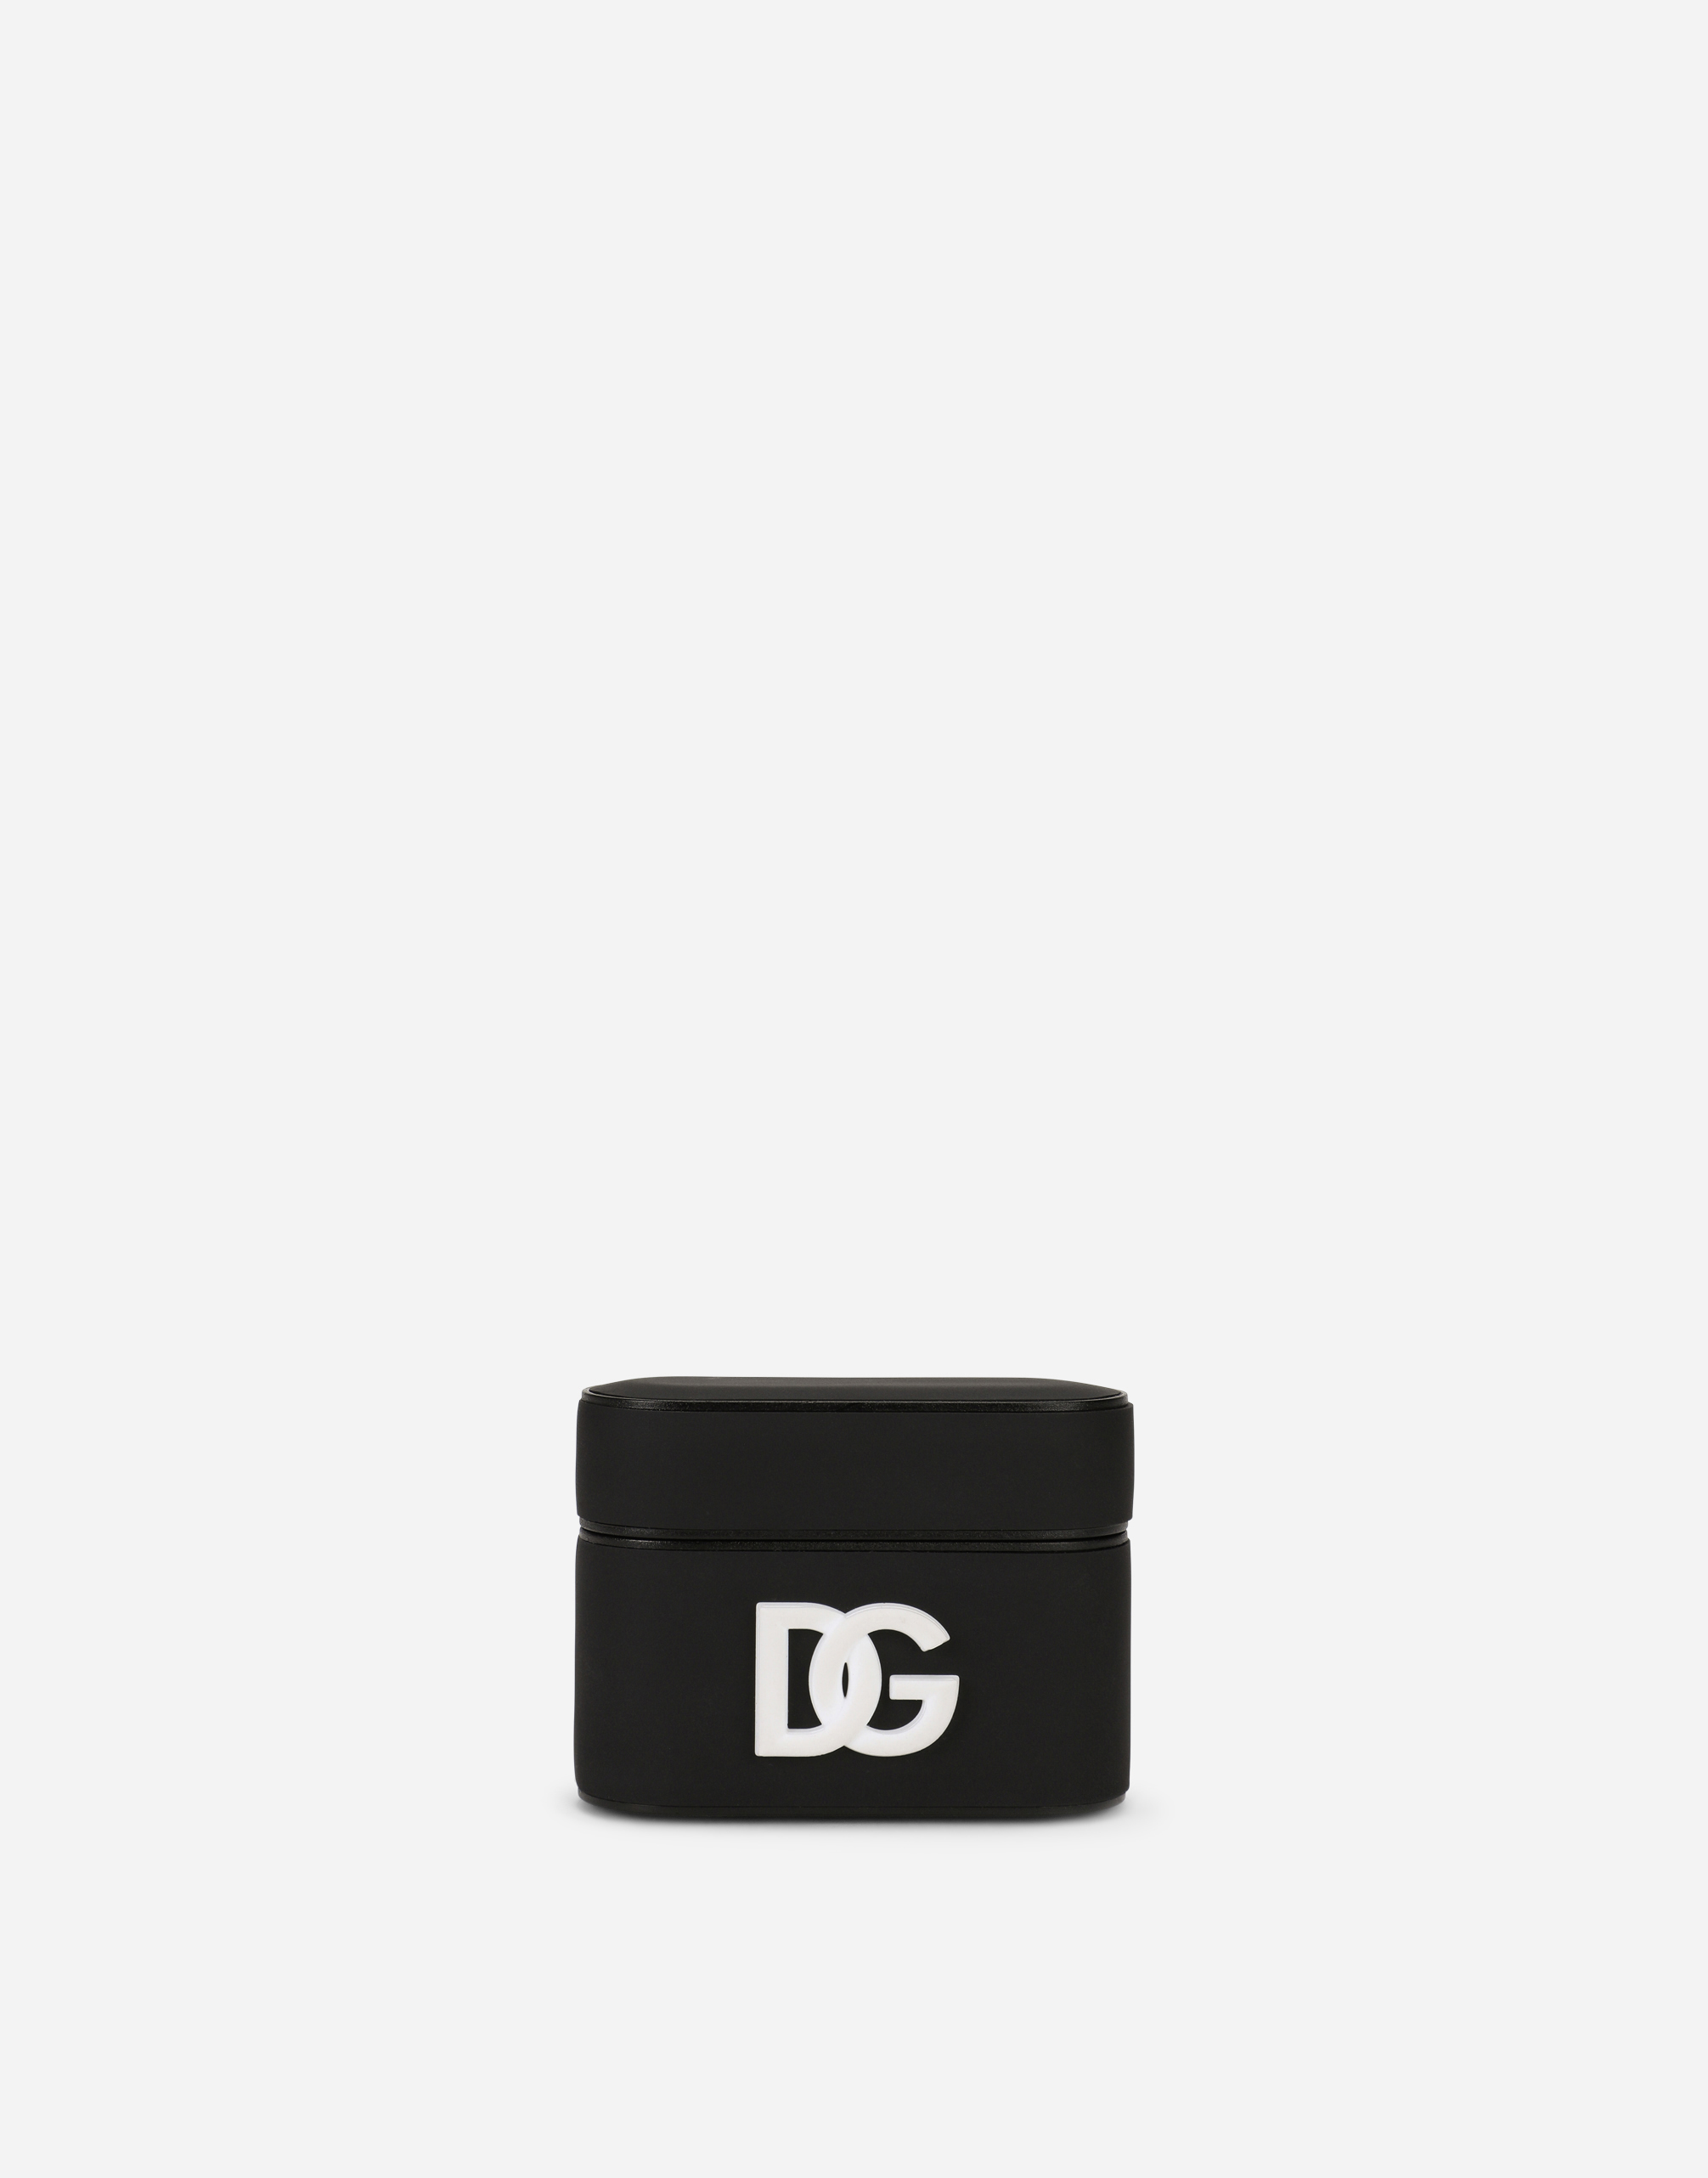 Rubber airpods pro case with DG logo